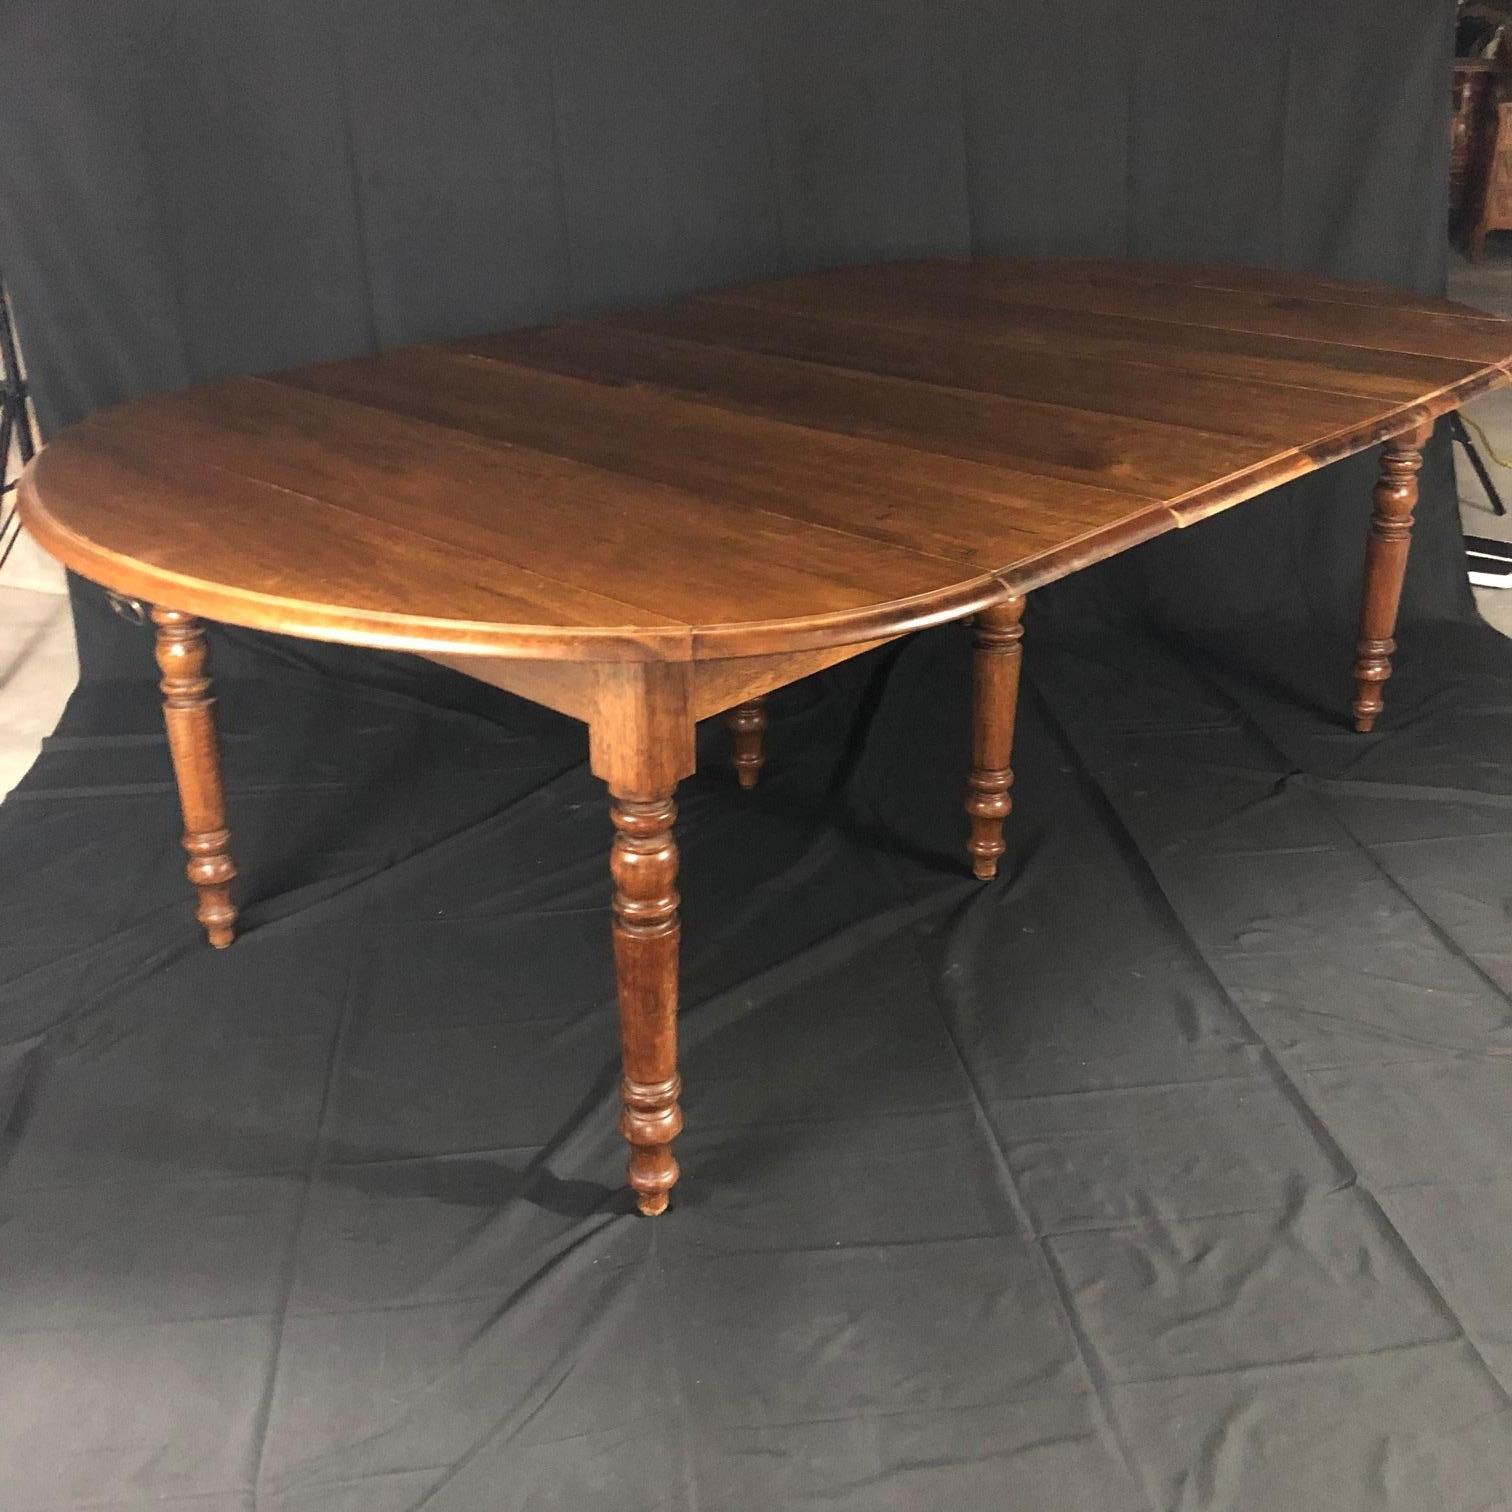 French Country Versatile 19th Century Walnut Dropleaf Dining Table with 4 Leaves 1